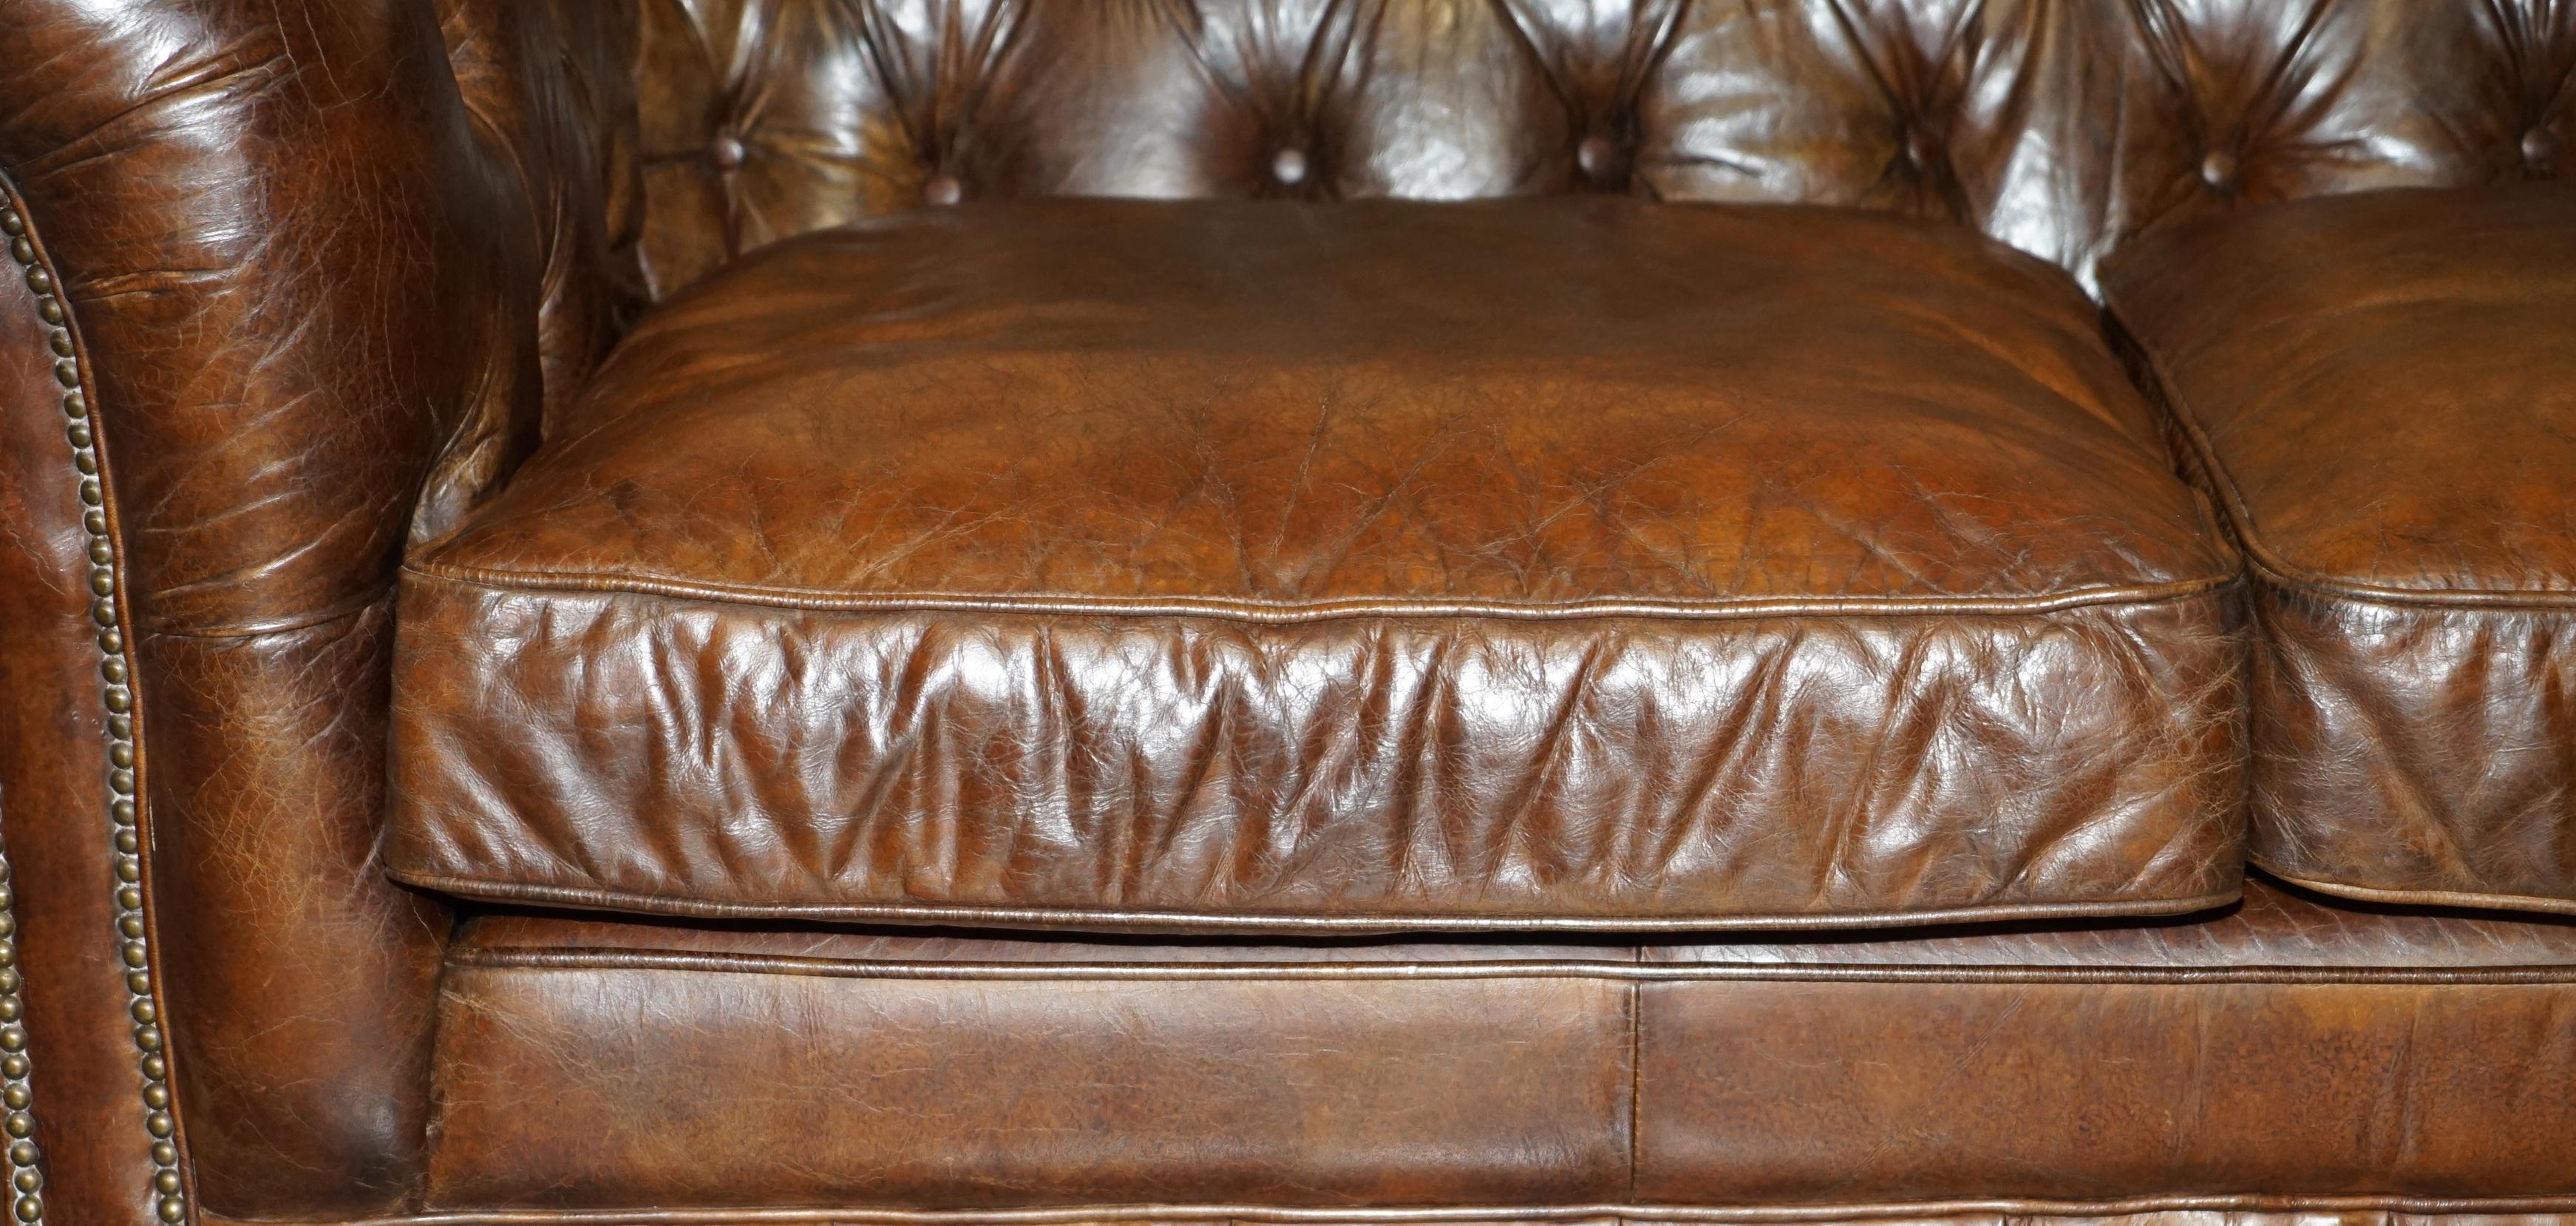 Hand-Crafted 1 OF 2 TIMOTHY OULTON HERITAGE BROWN OVERSIZED LEATHER CHESTERFIELD HALO SOFAs For Sale